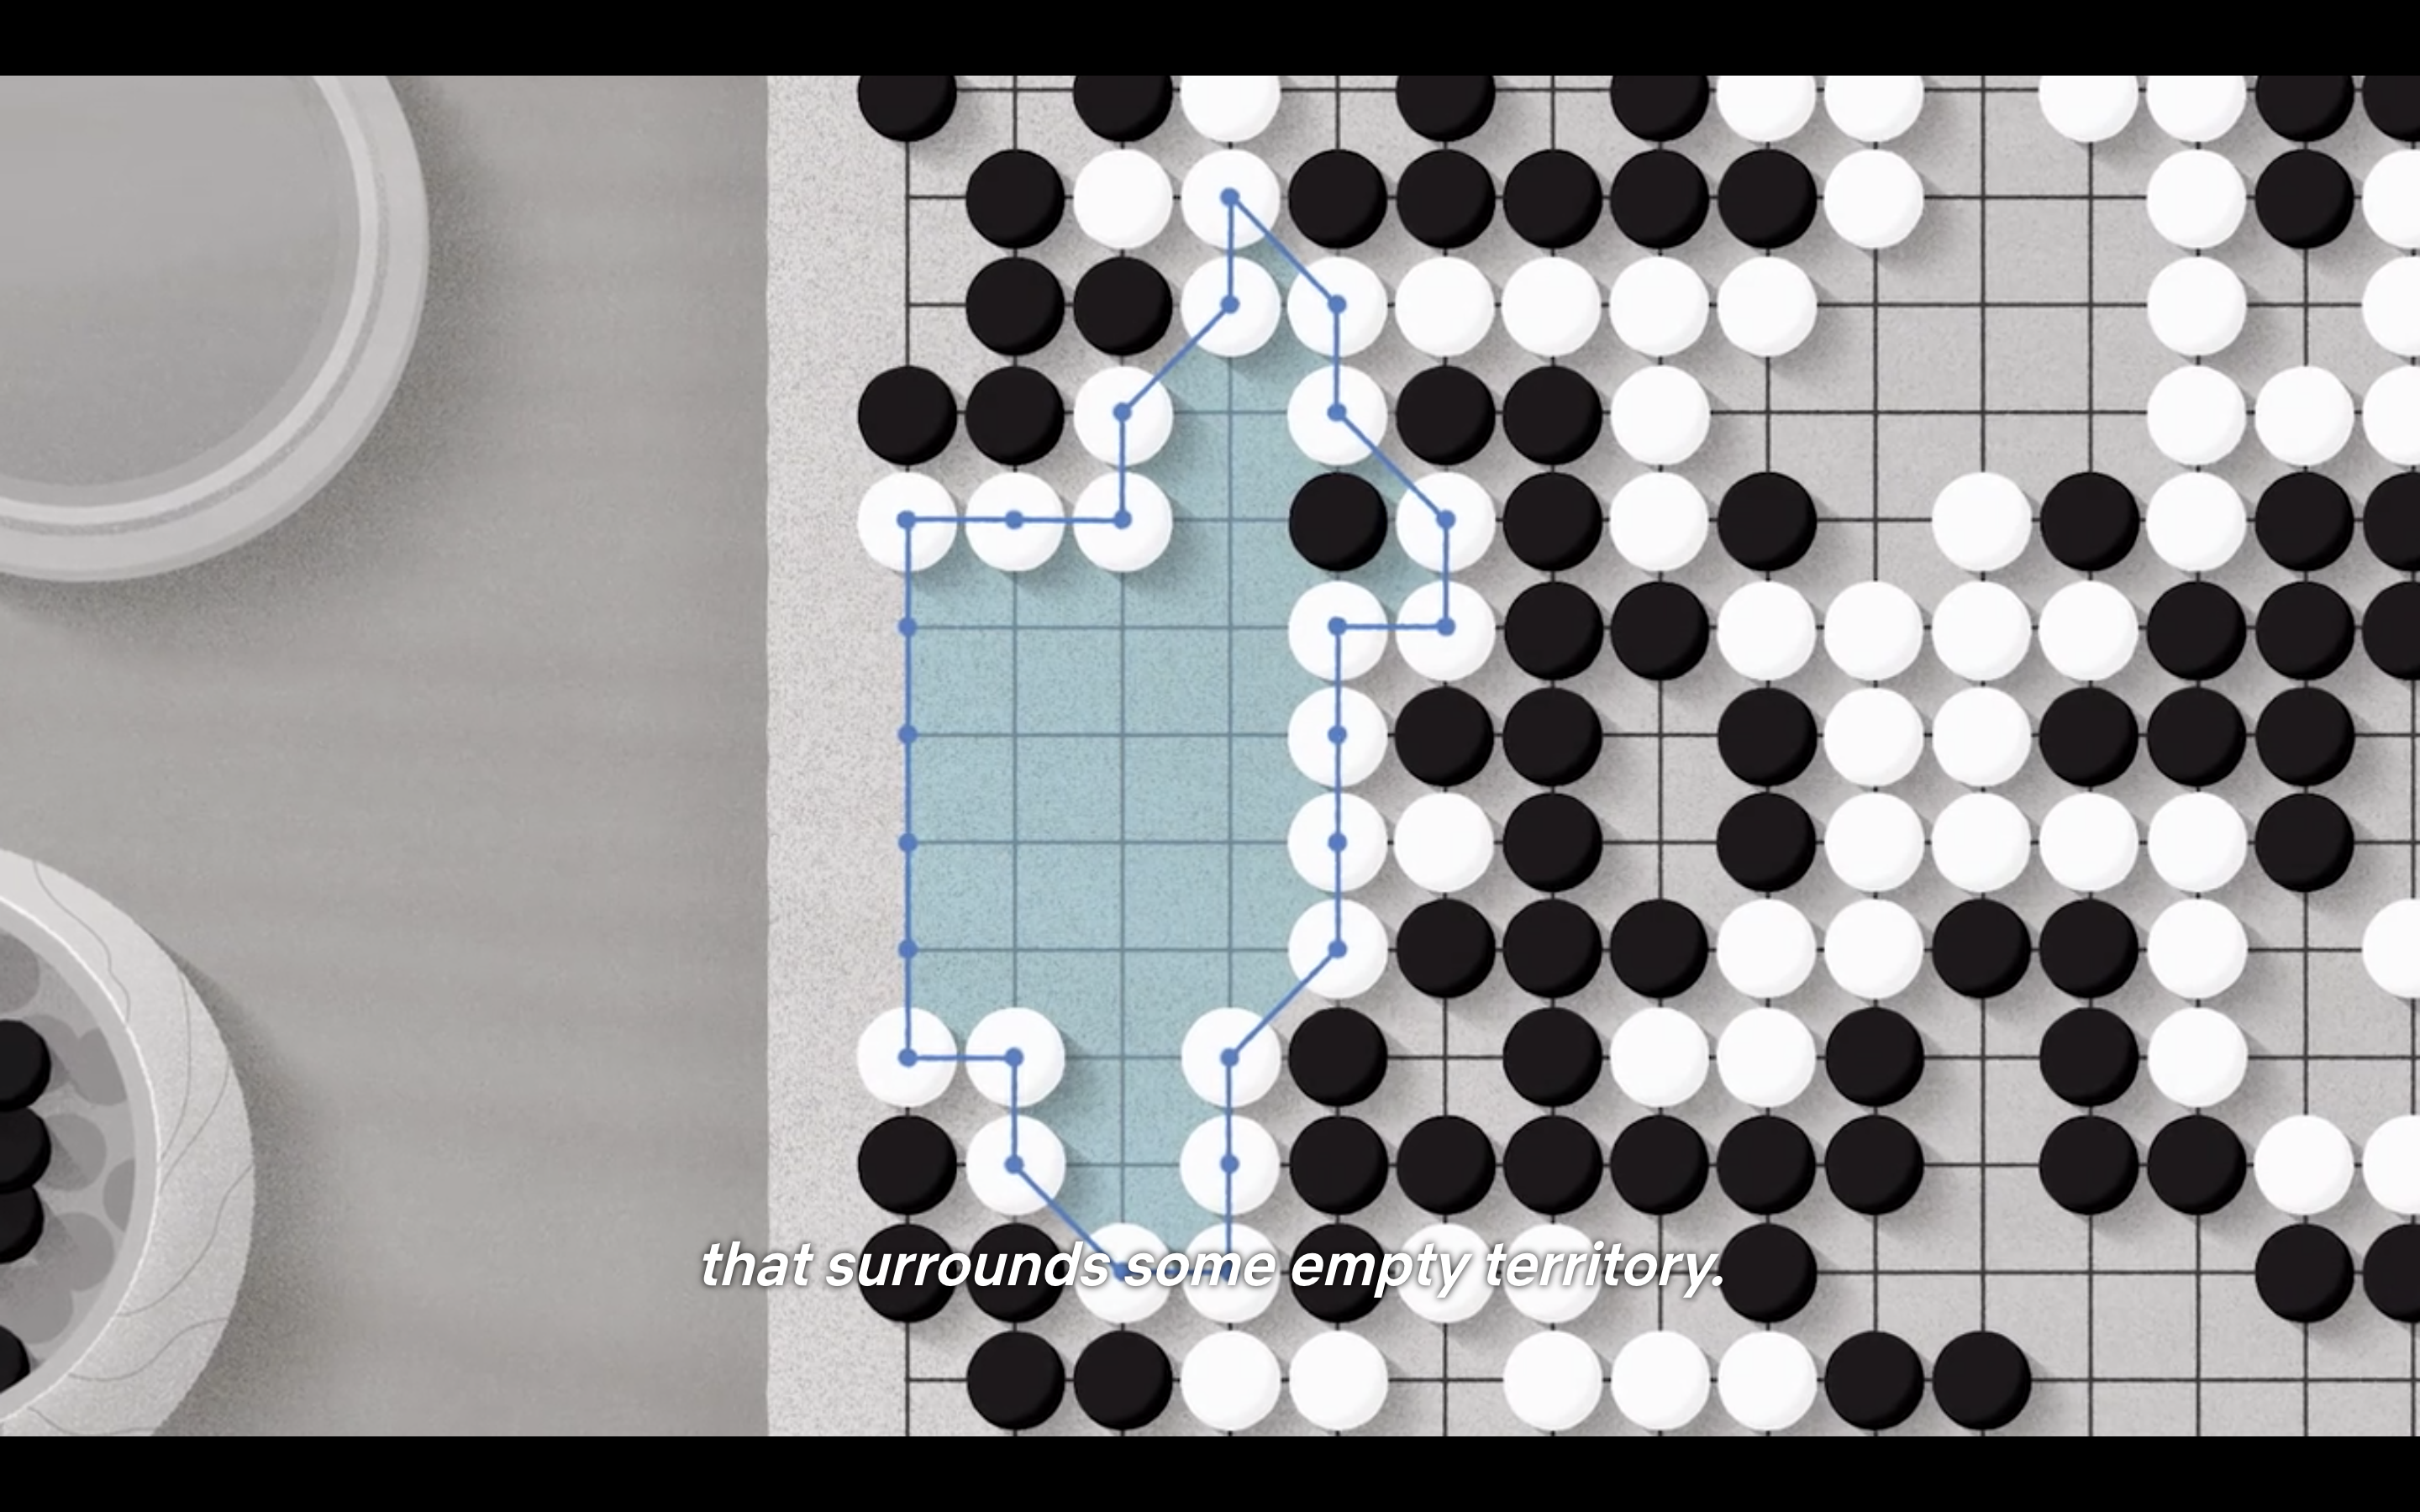 What Can AI (and AlphaGo) Teach us About Being Human?